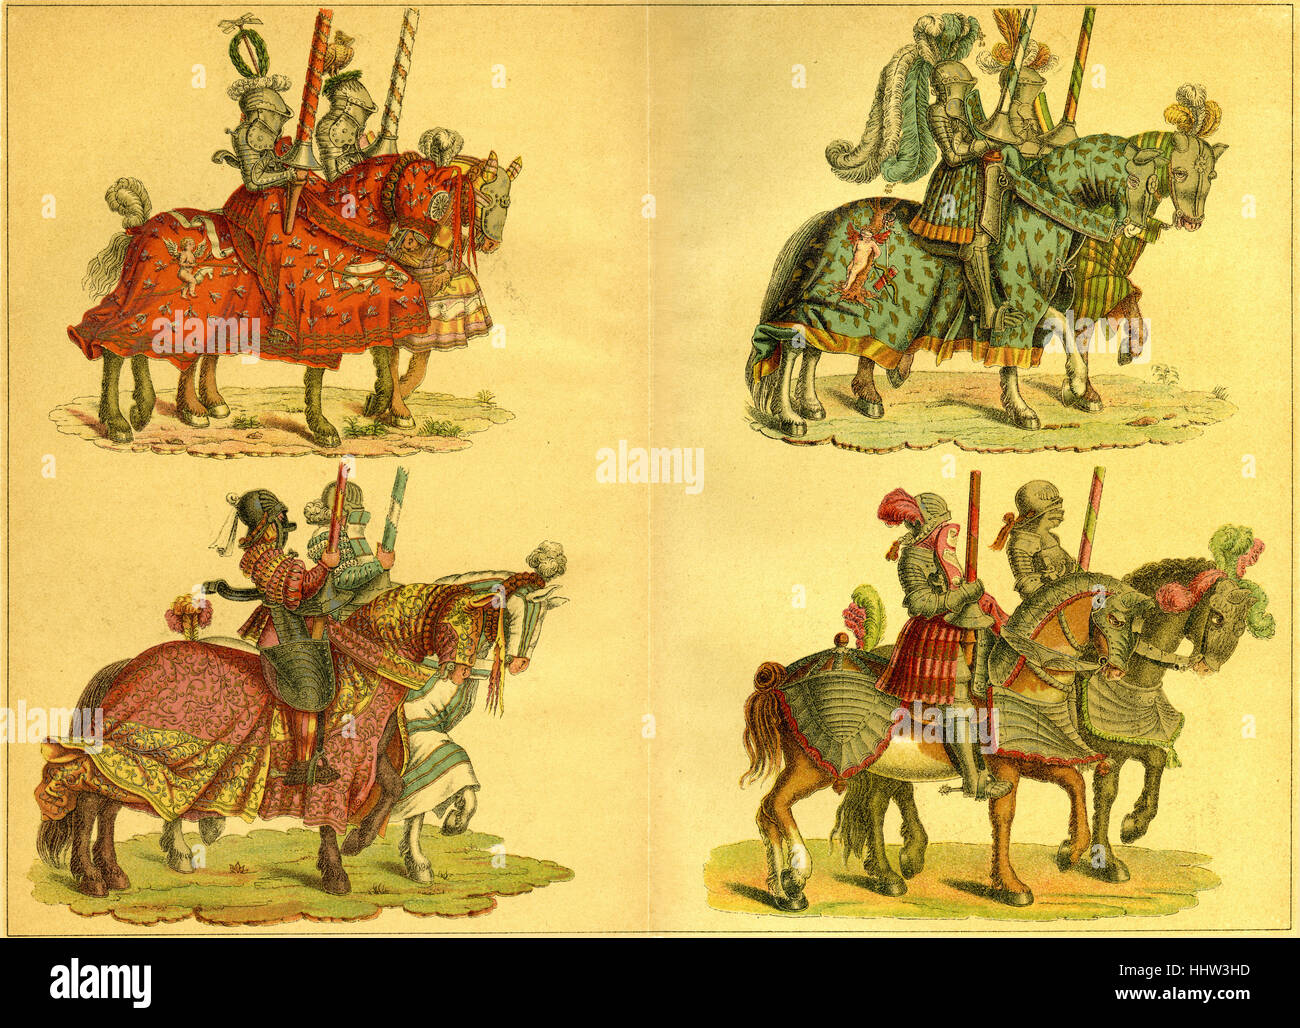 Knights riding horses on their way to a jousting tournament.  Illustration by Hans Burgkmair (1472 - 1531) for Maximilian I, Stock Photo